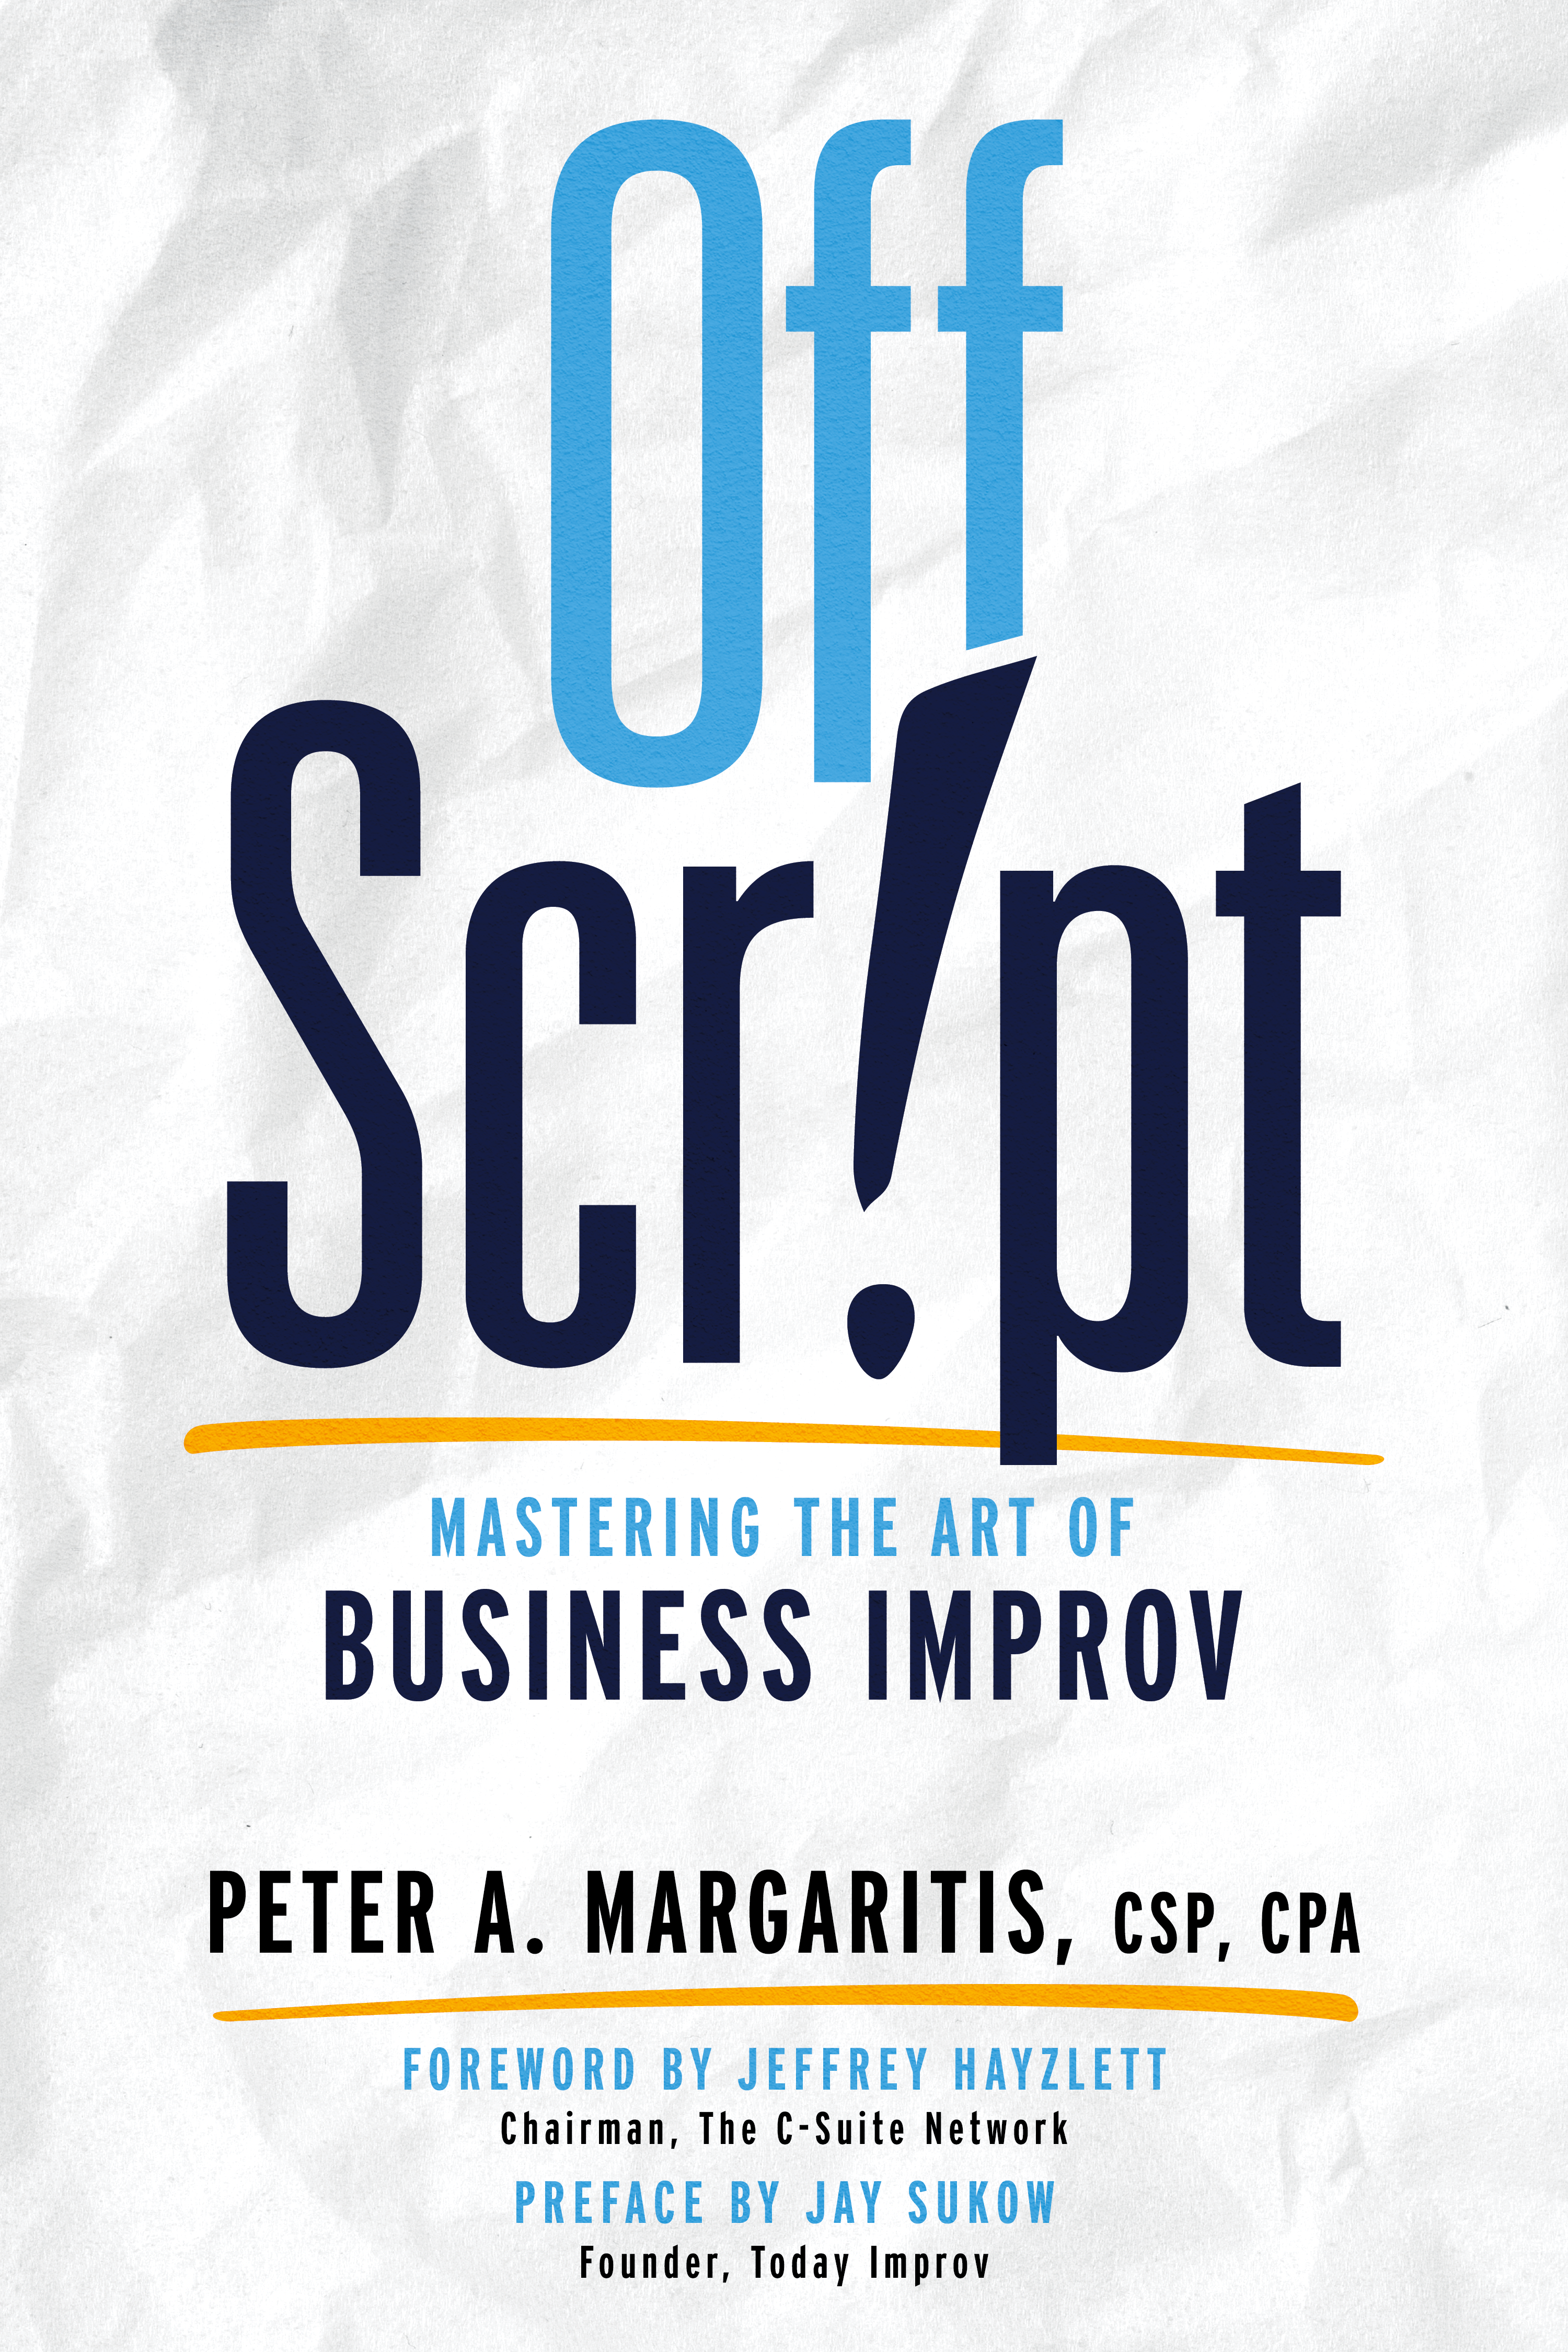 [PRESS RELEASE] Getting Into the Nitty Gritty of Improv